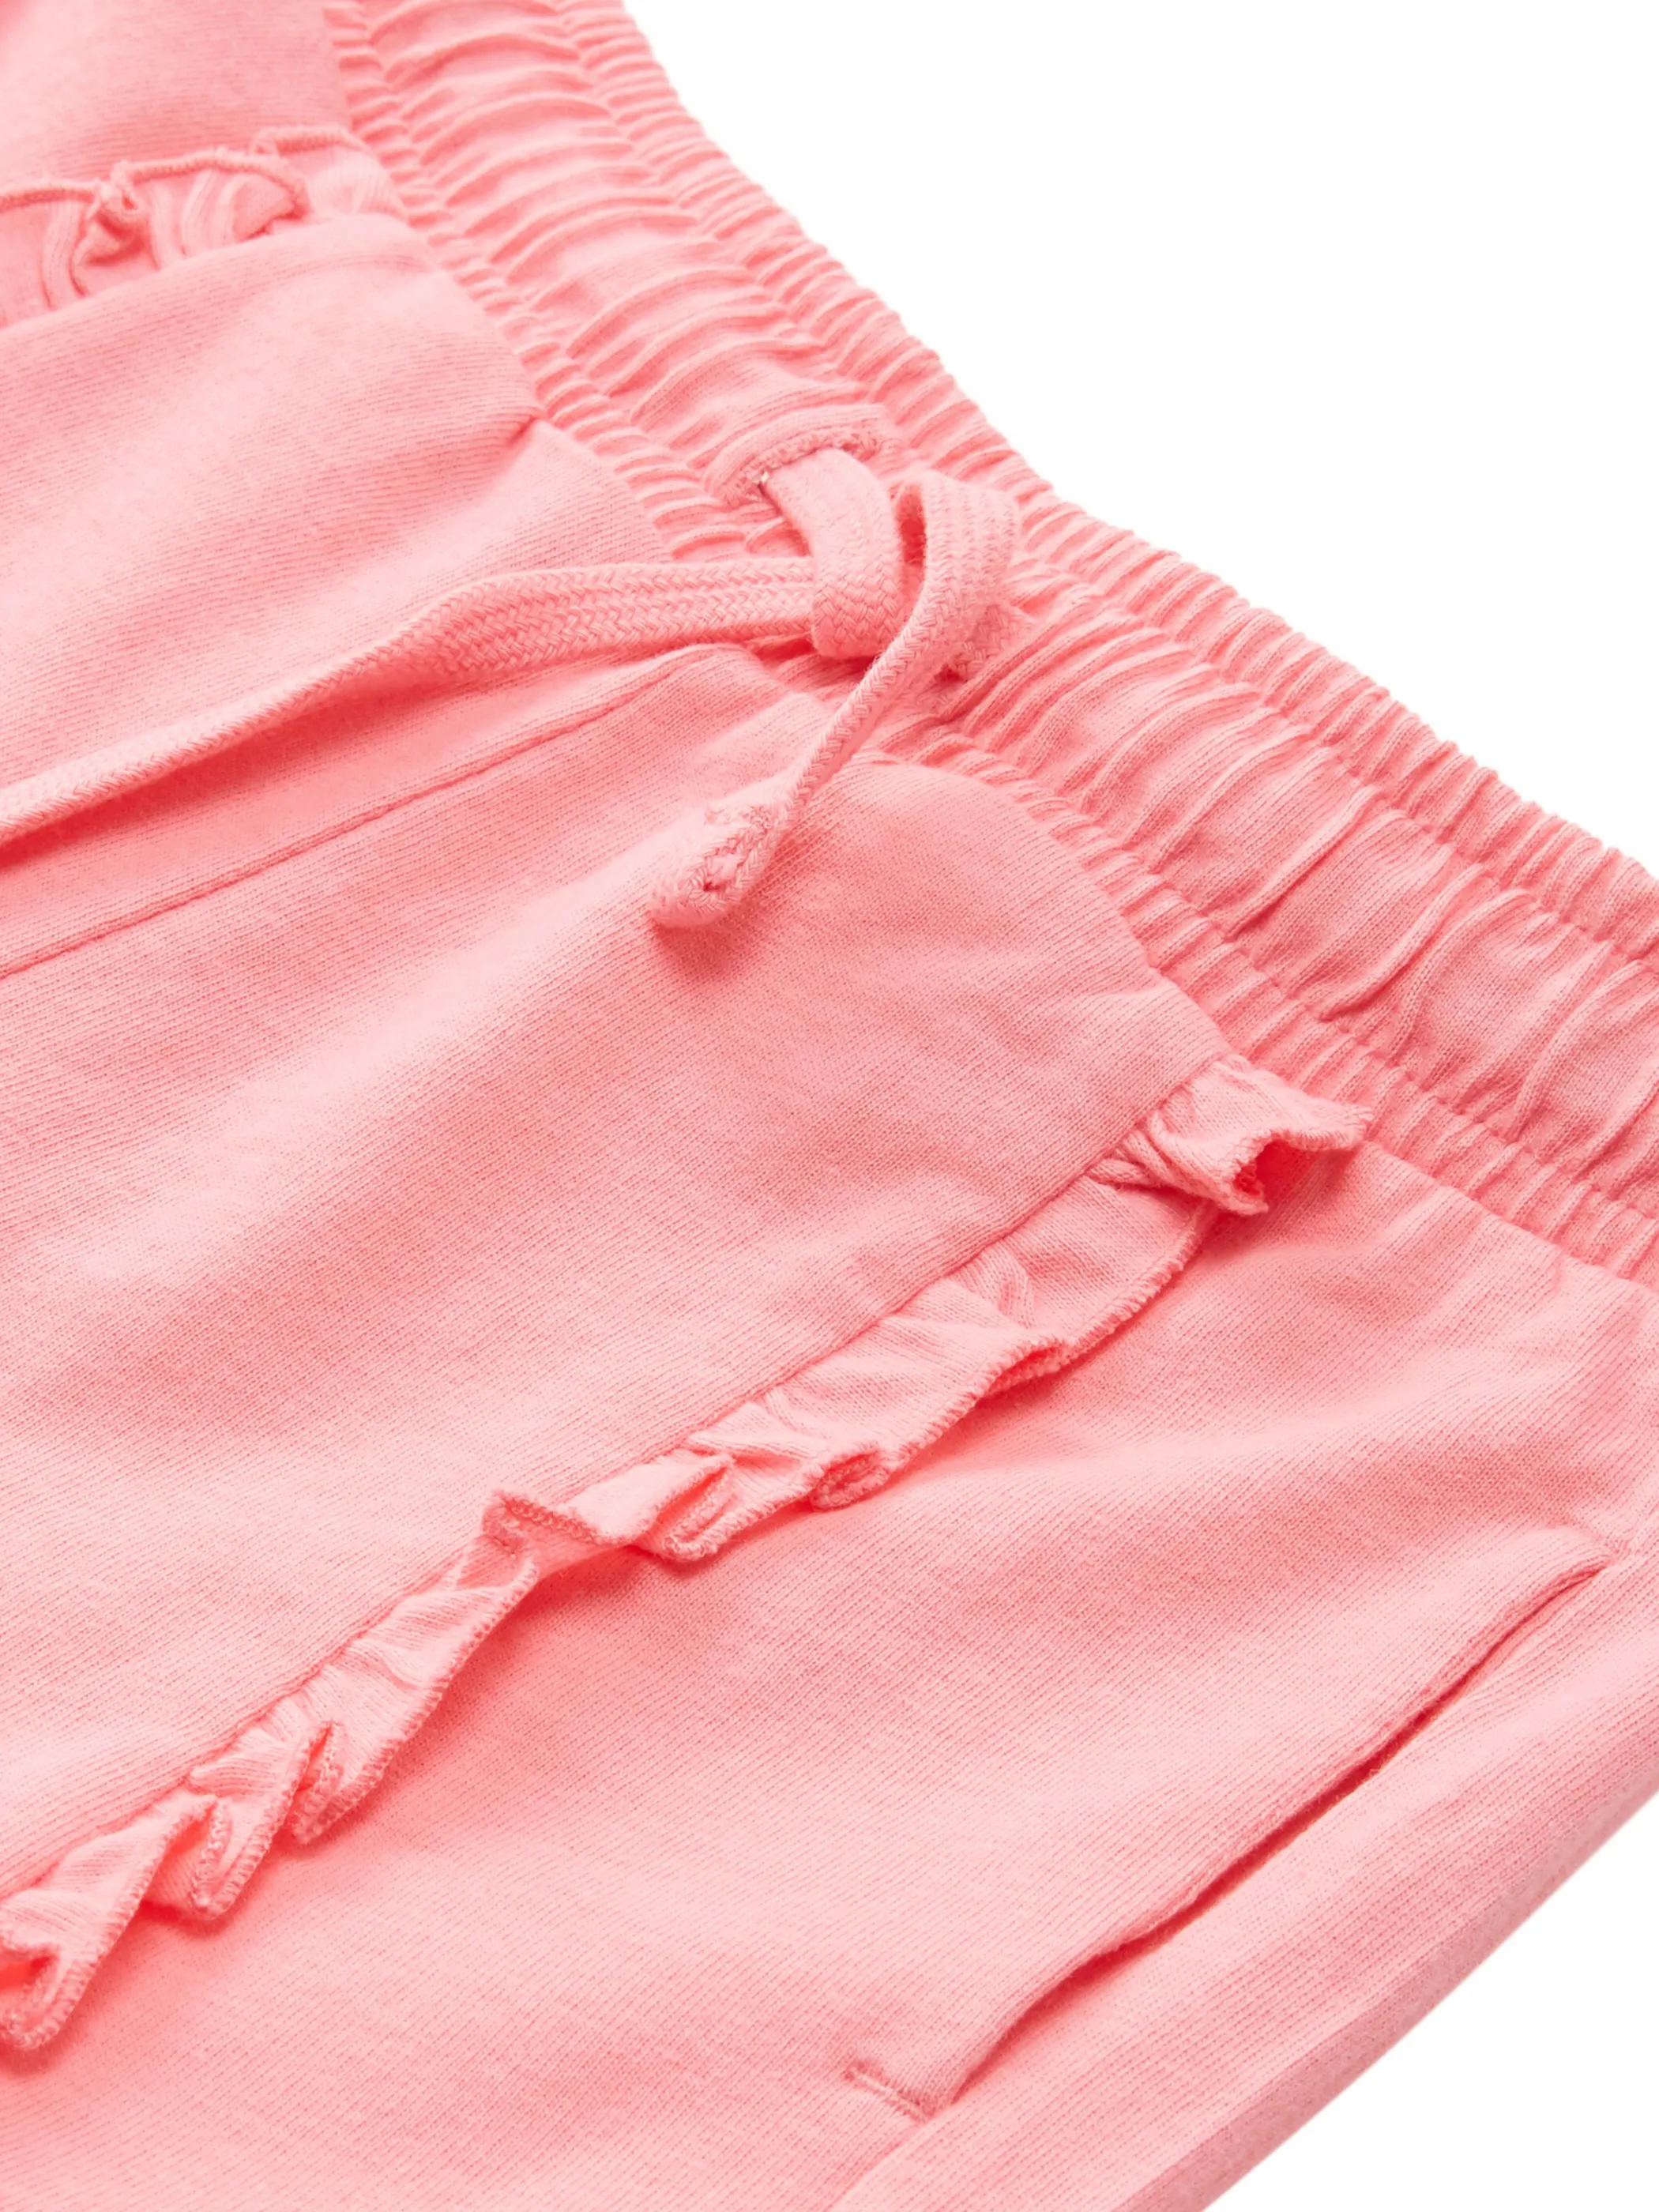 Tom Tailor 1031843 ruffled jersey shorts Pink 865867 23807 3